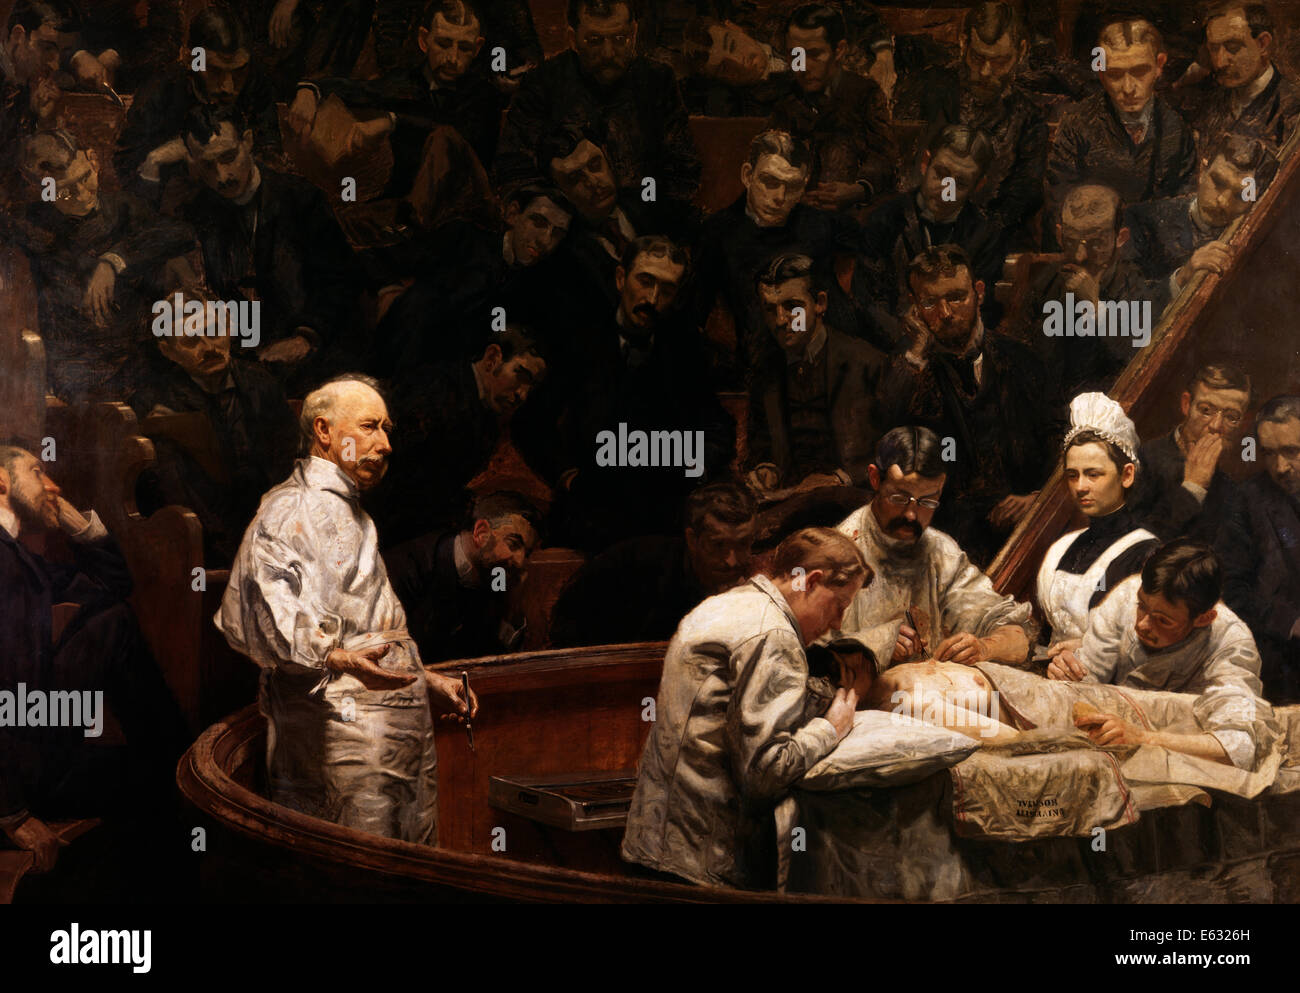 1890s THE AGNEW CLINIC PAINTING BY THOMAS EAKINS CLASS OF MEDICAL STUDENTS OBSERVING SURGERY BY SENIOR PHYSICIAN Stock Photo